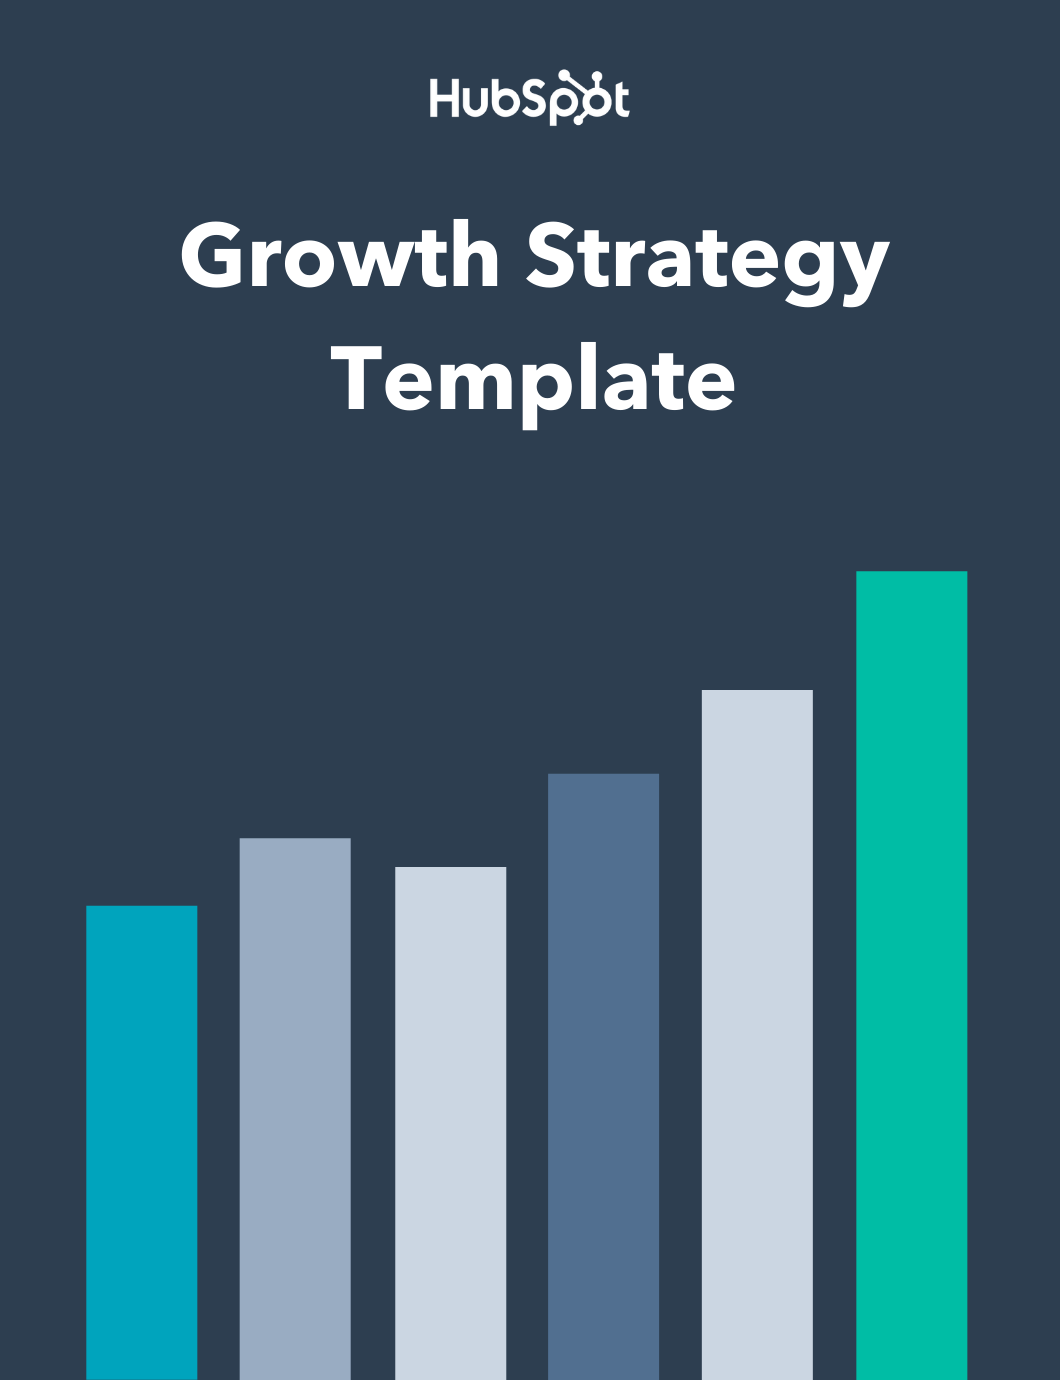 Growth Strategy Template (4)